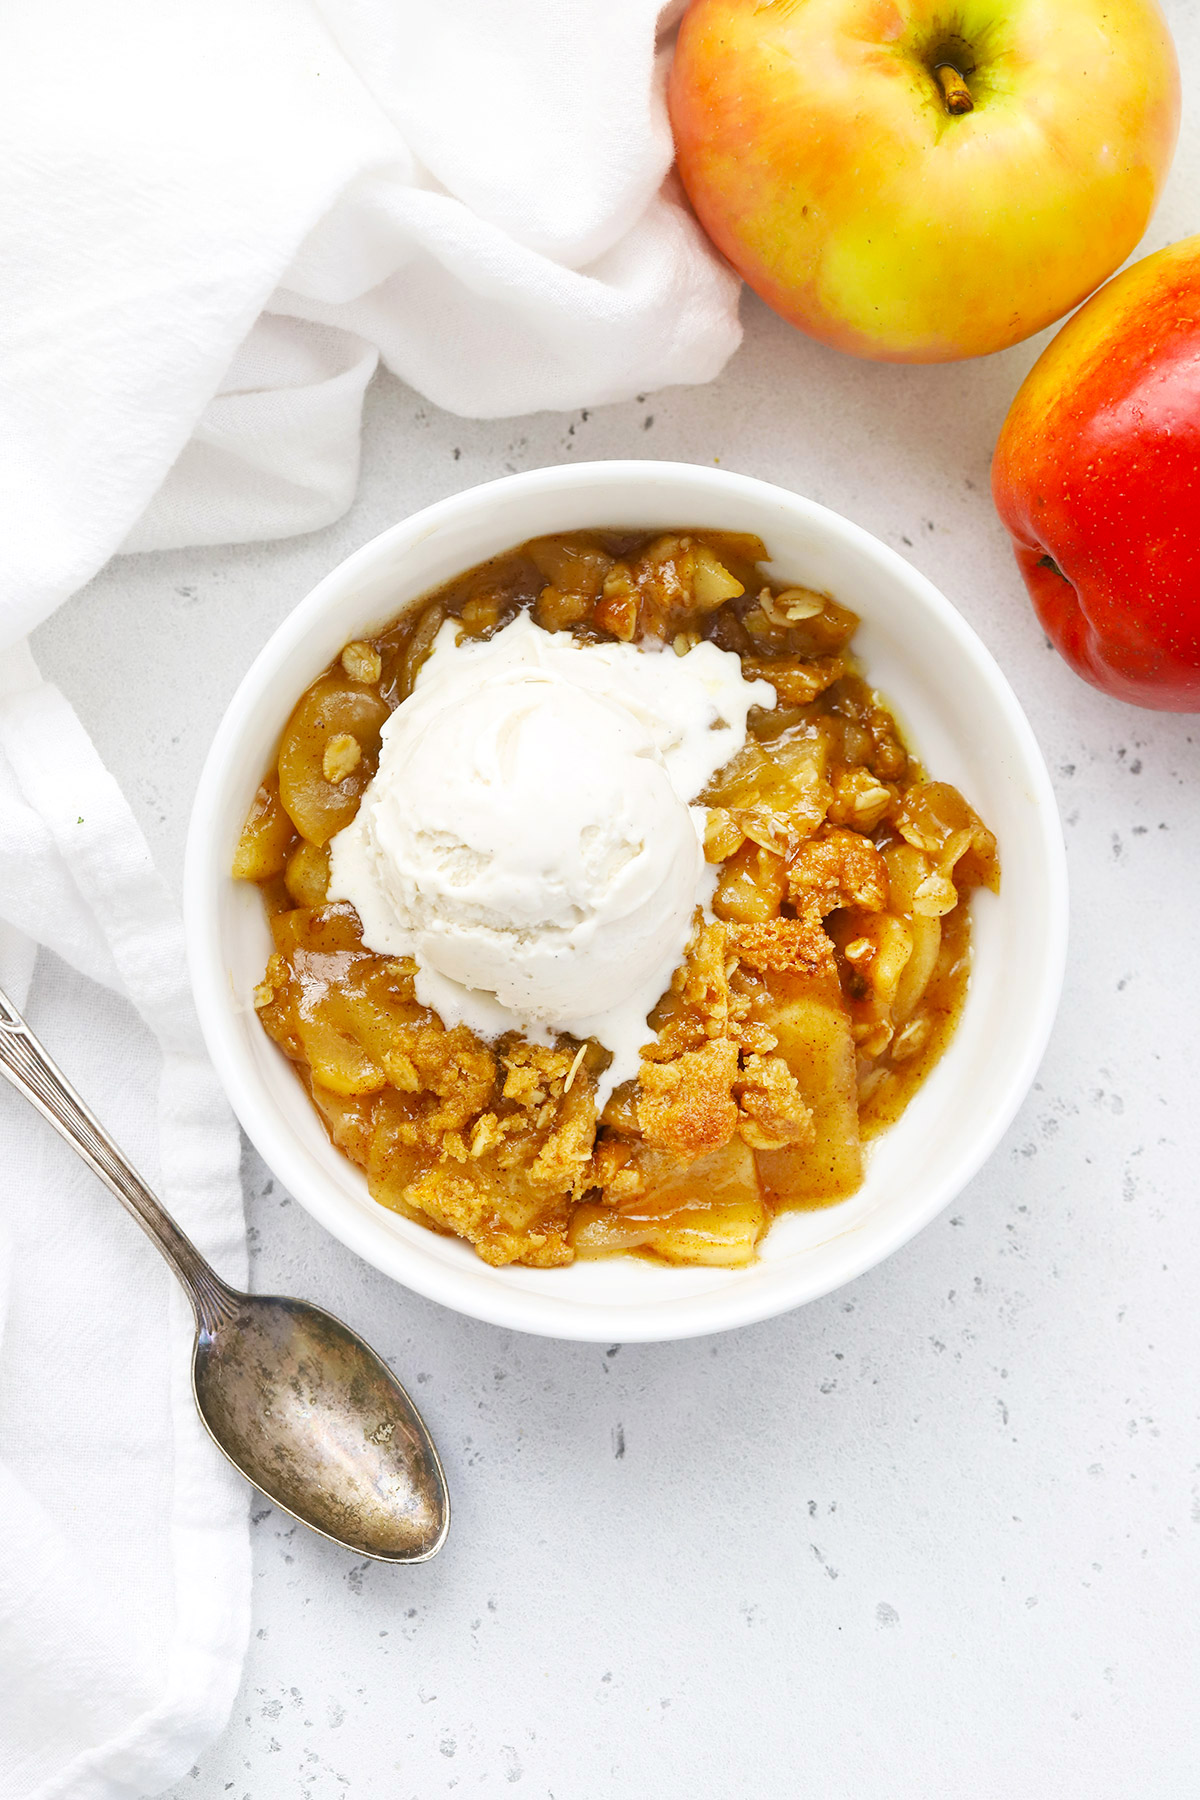 A bowl of gluten-free apple crisp with a scoop of dairy-free vanilla ice cream